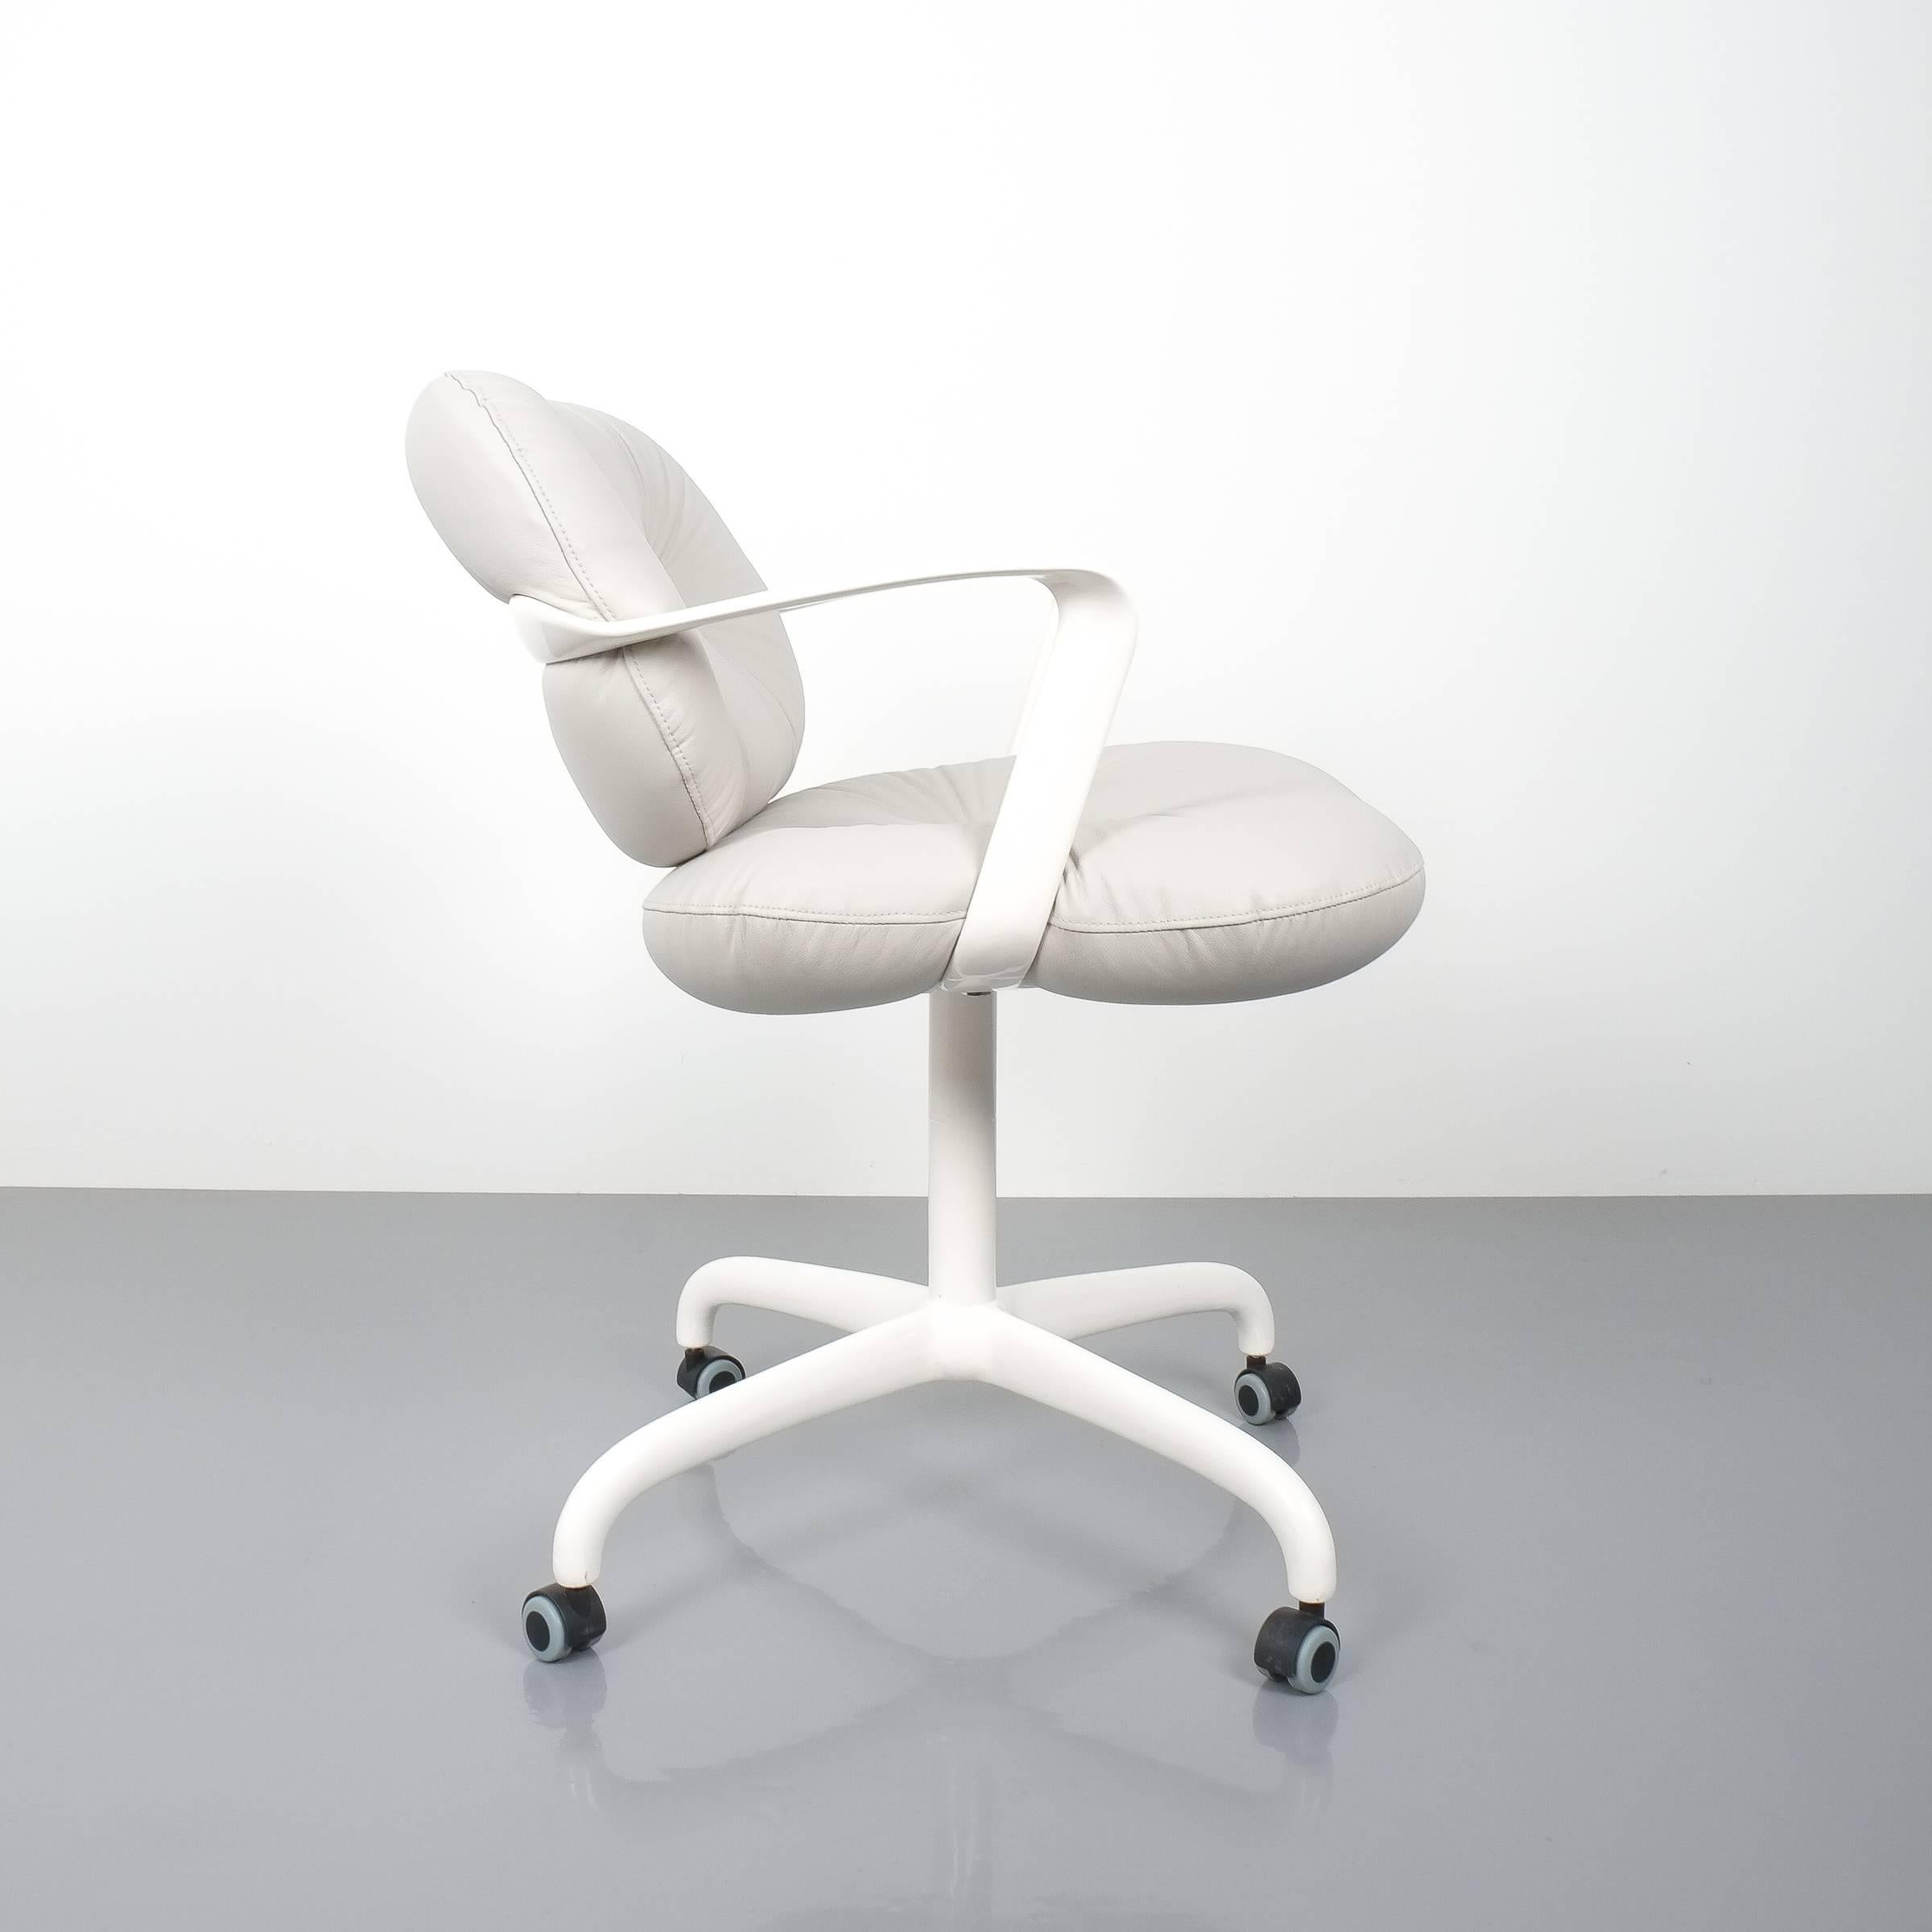 Andrew Morrison and Bruce Hannah for Knoll office chair grey leather, 1975. Newly upholstered grey leather office desk chair on a white base (no swivel base) in great condition.